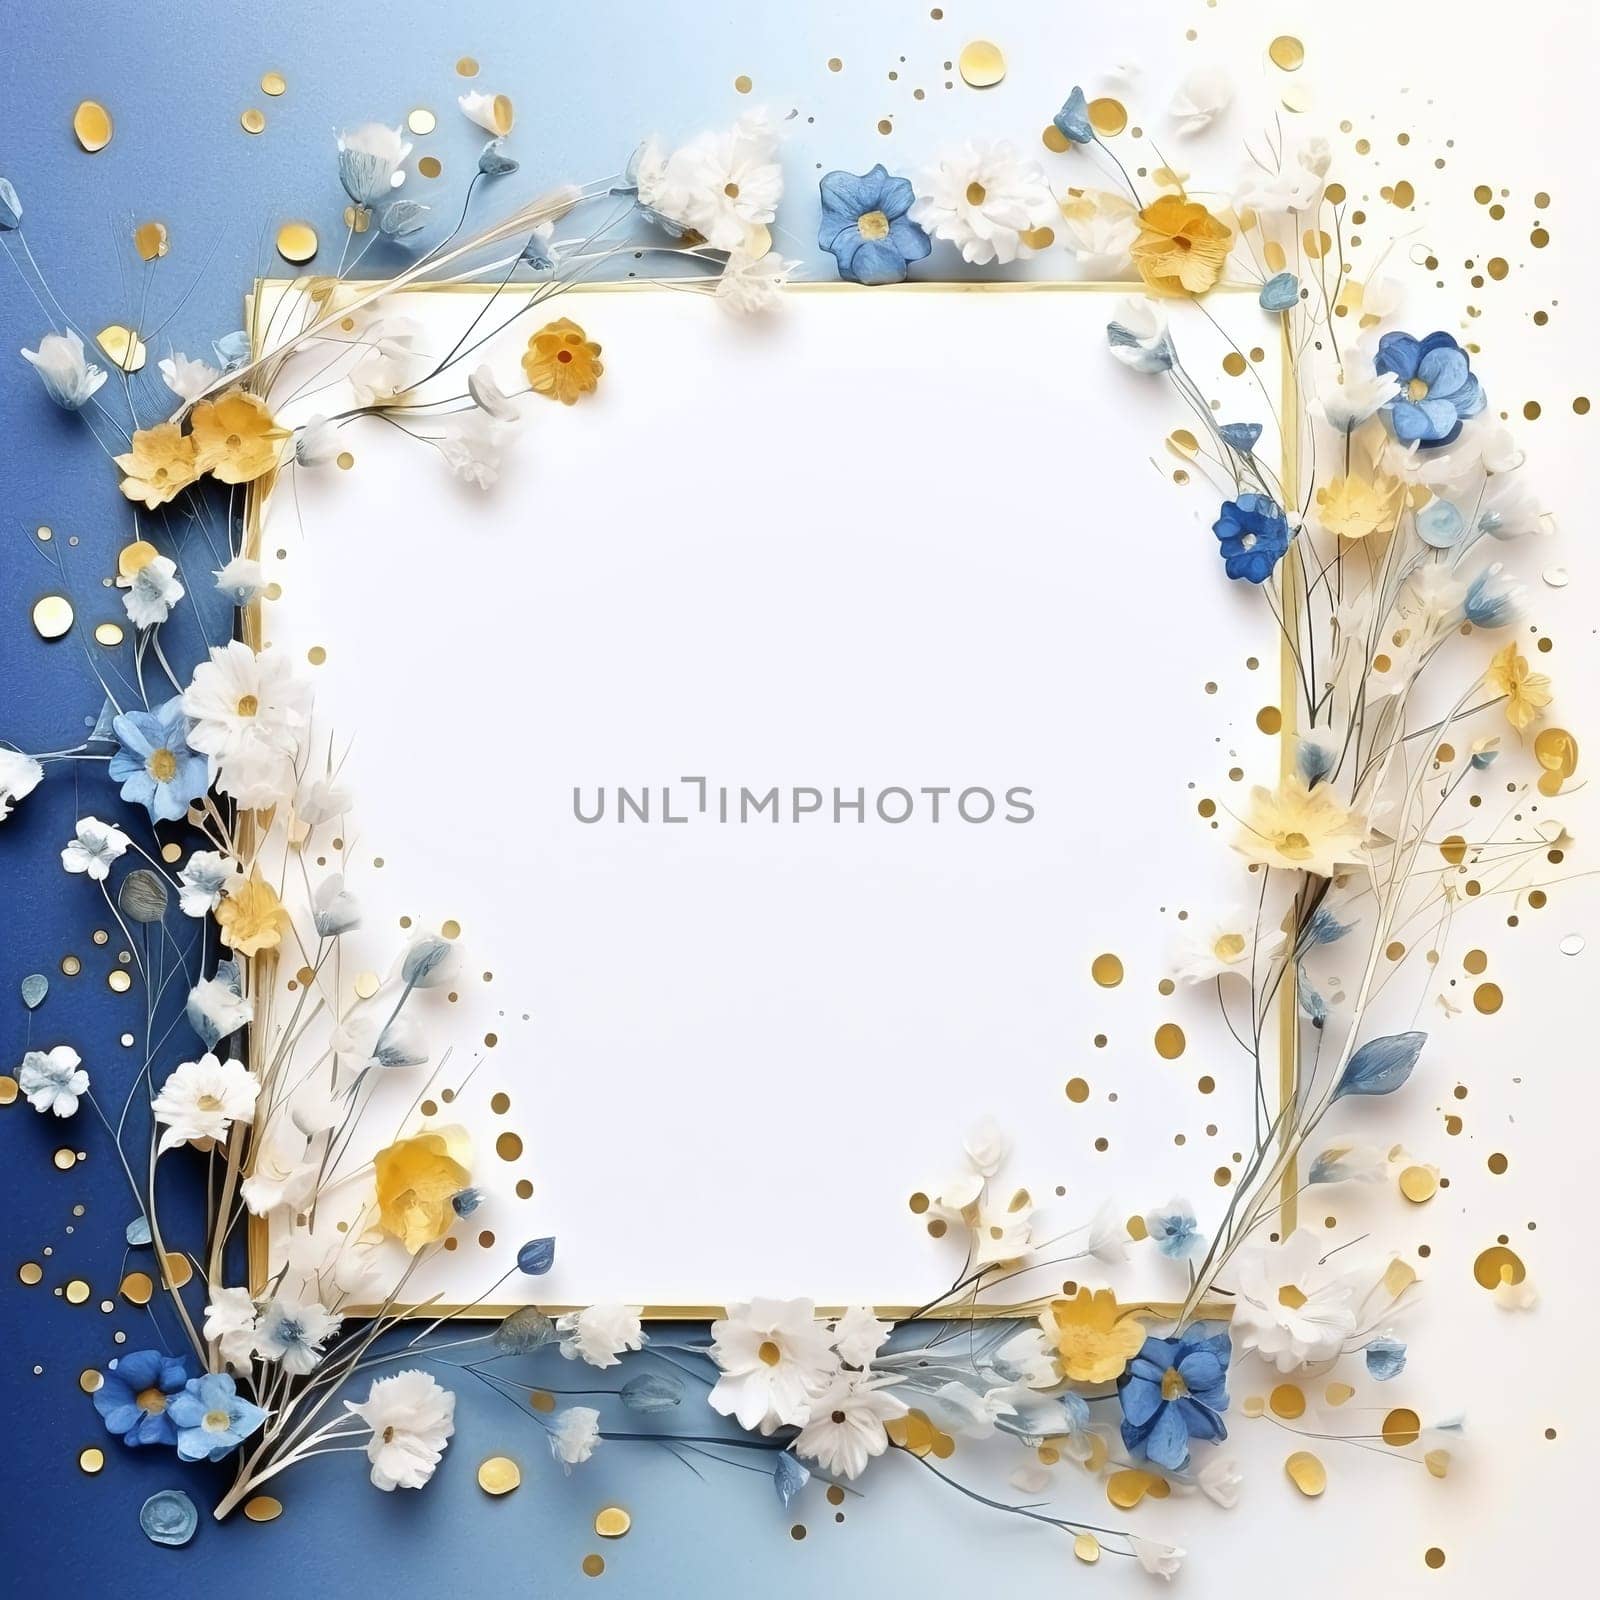 White blank with space for your own content, around decorations of white, blue and gold flowers with confetti. New Year fun and festivities.